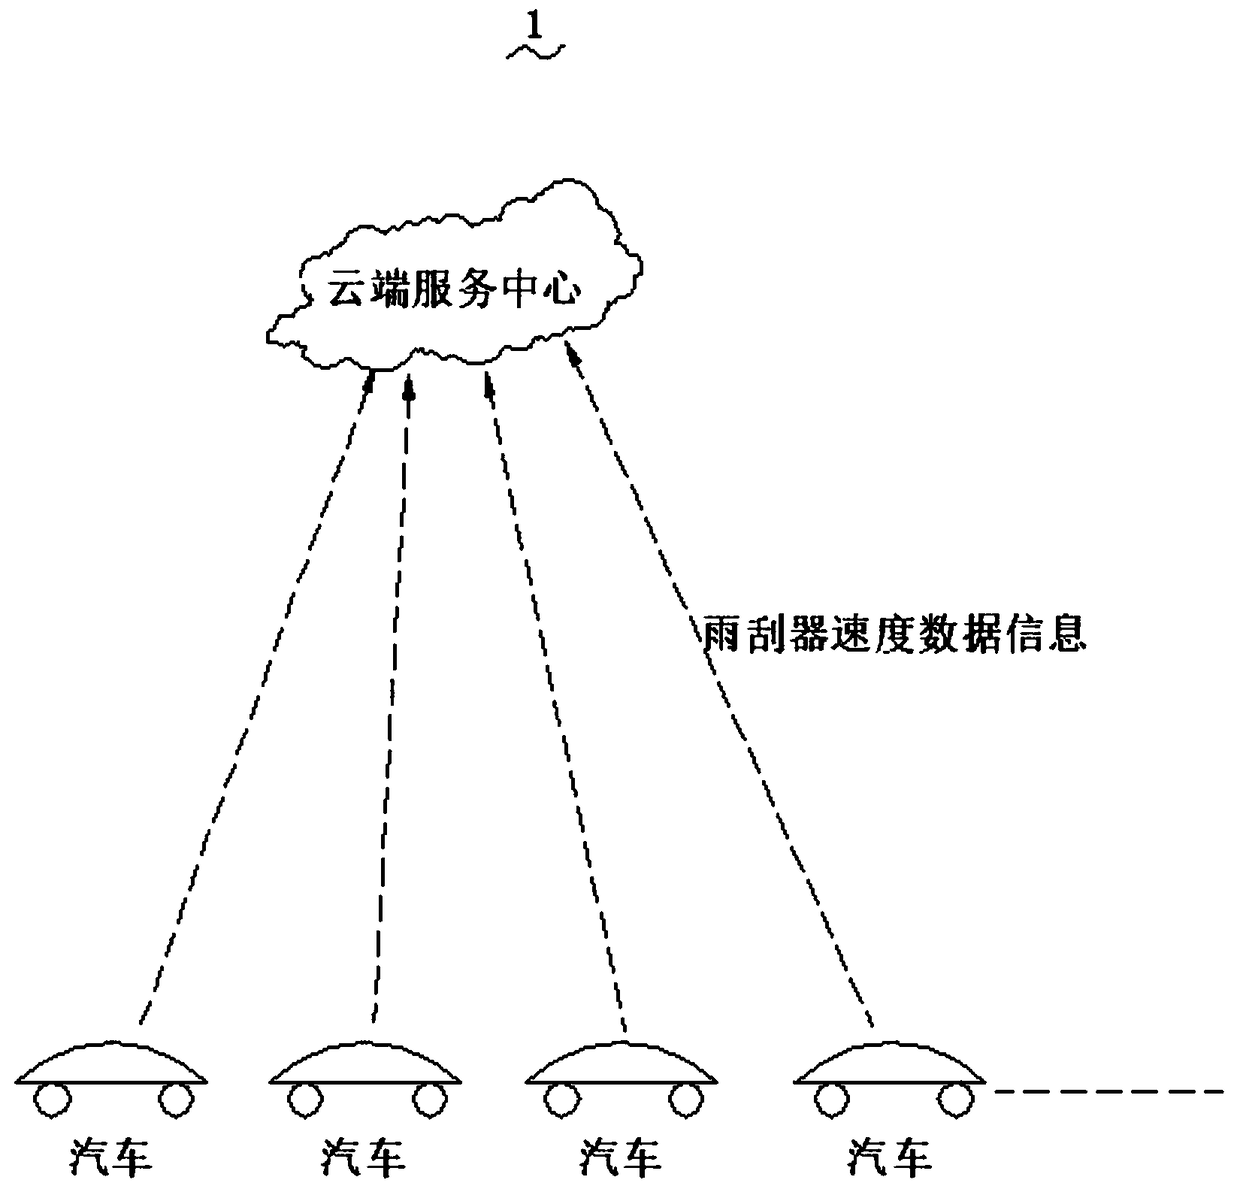 Real-time rainfall monitoring system and method based on automobile wipers